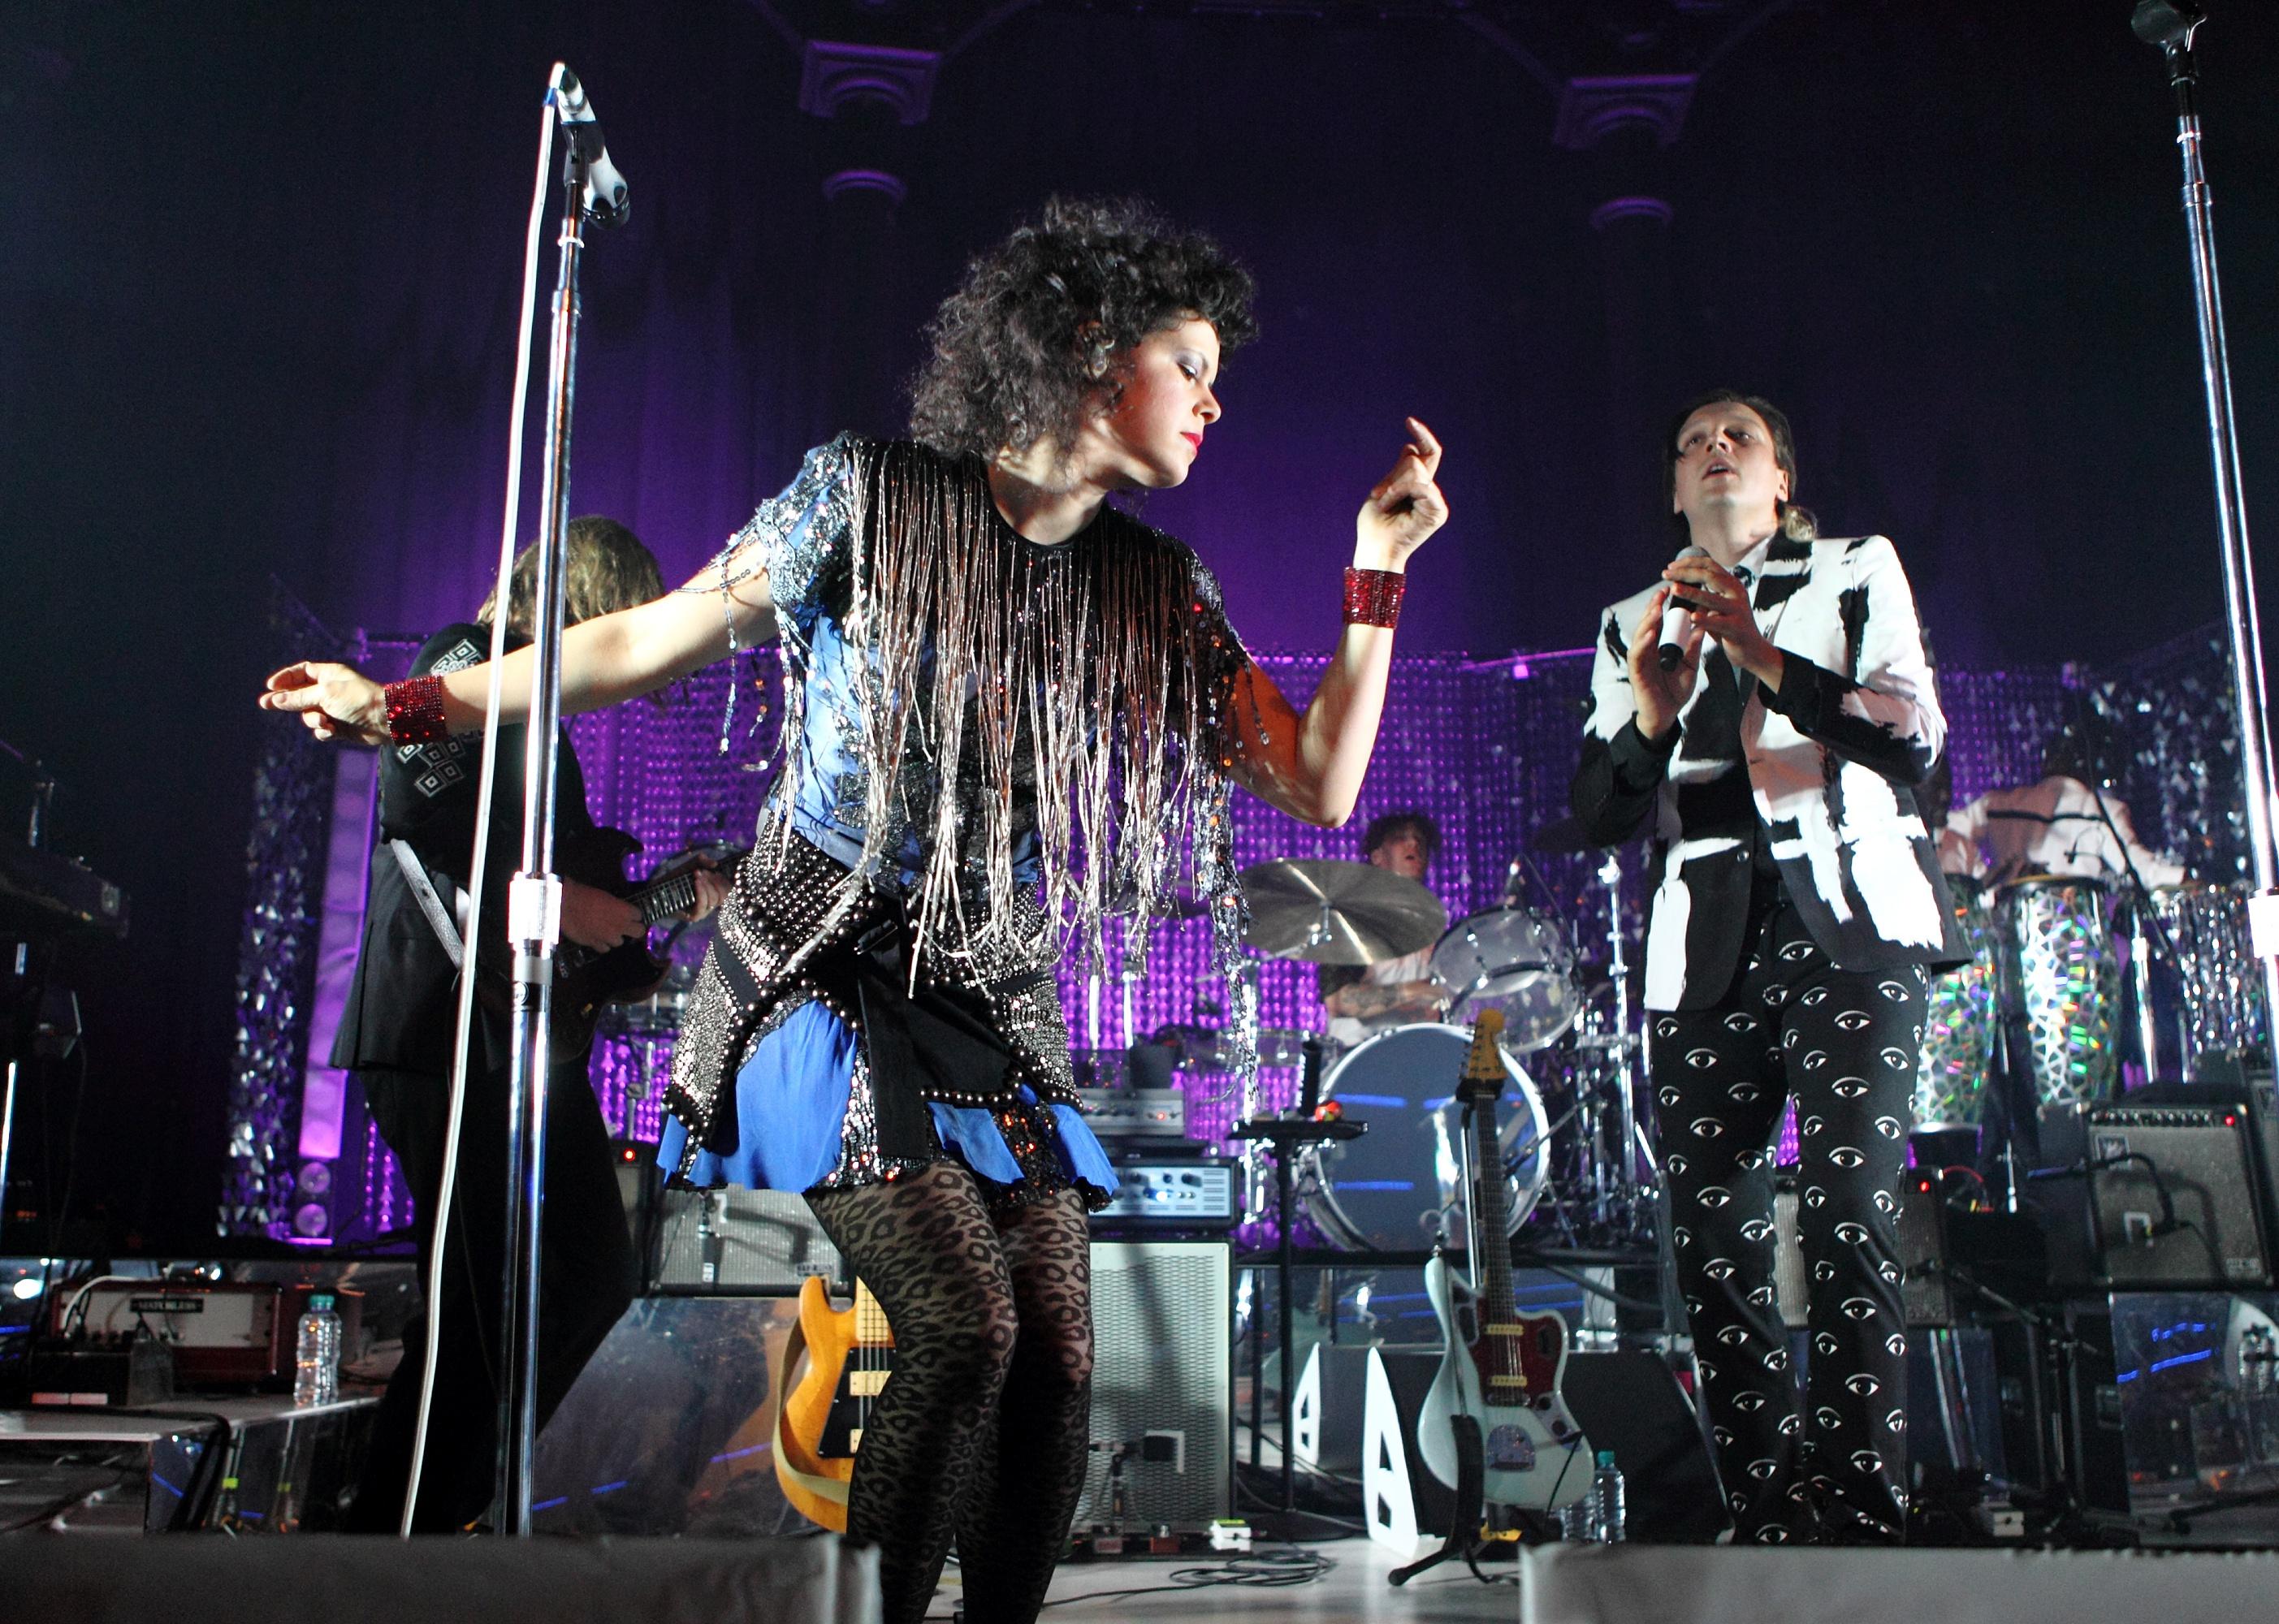 Arcade Fire performs at a concert